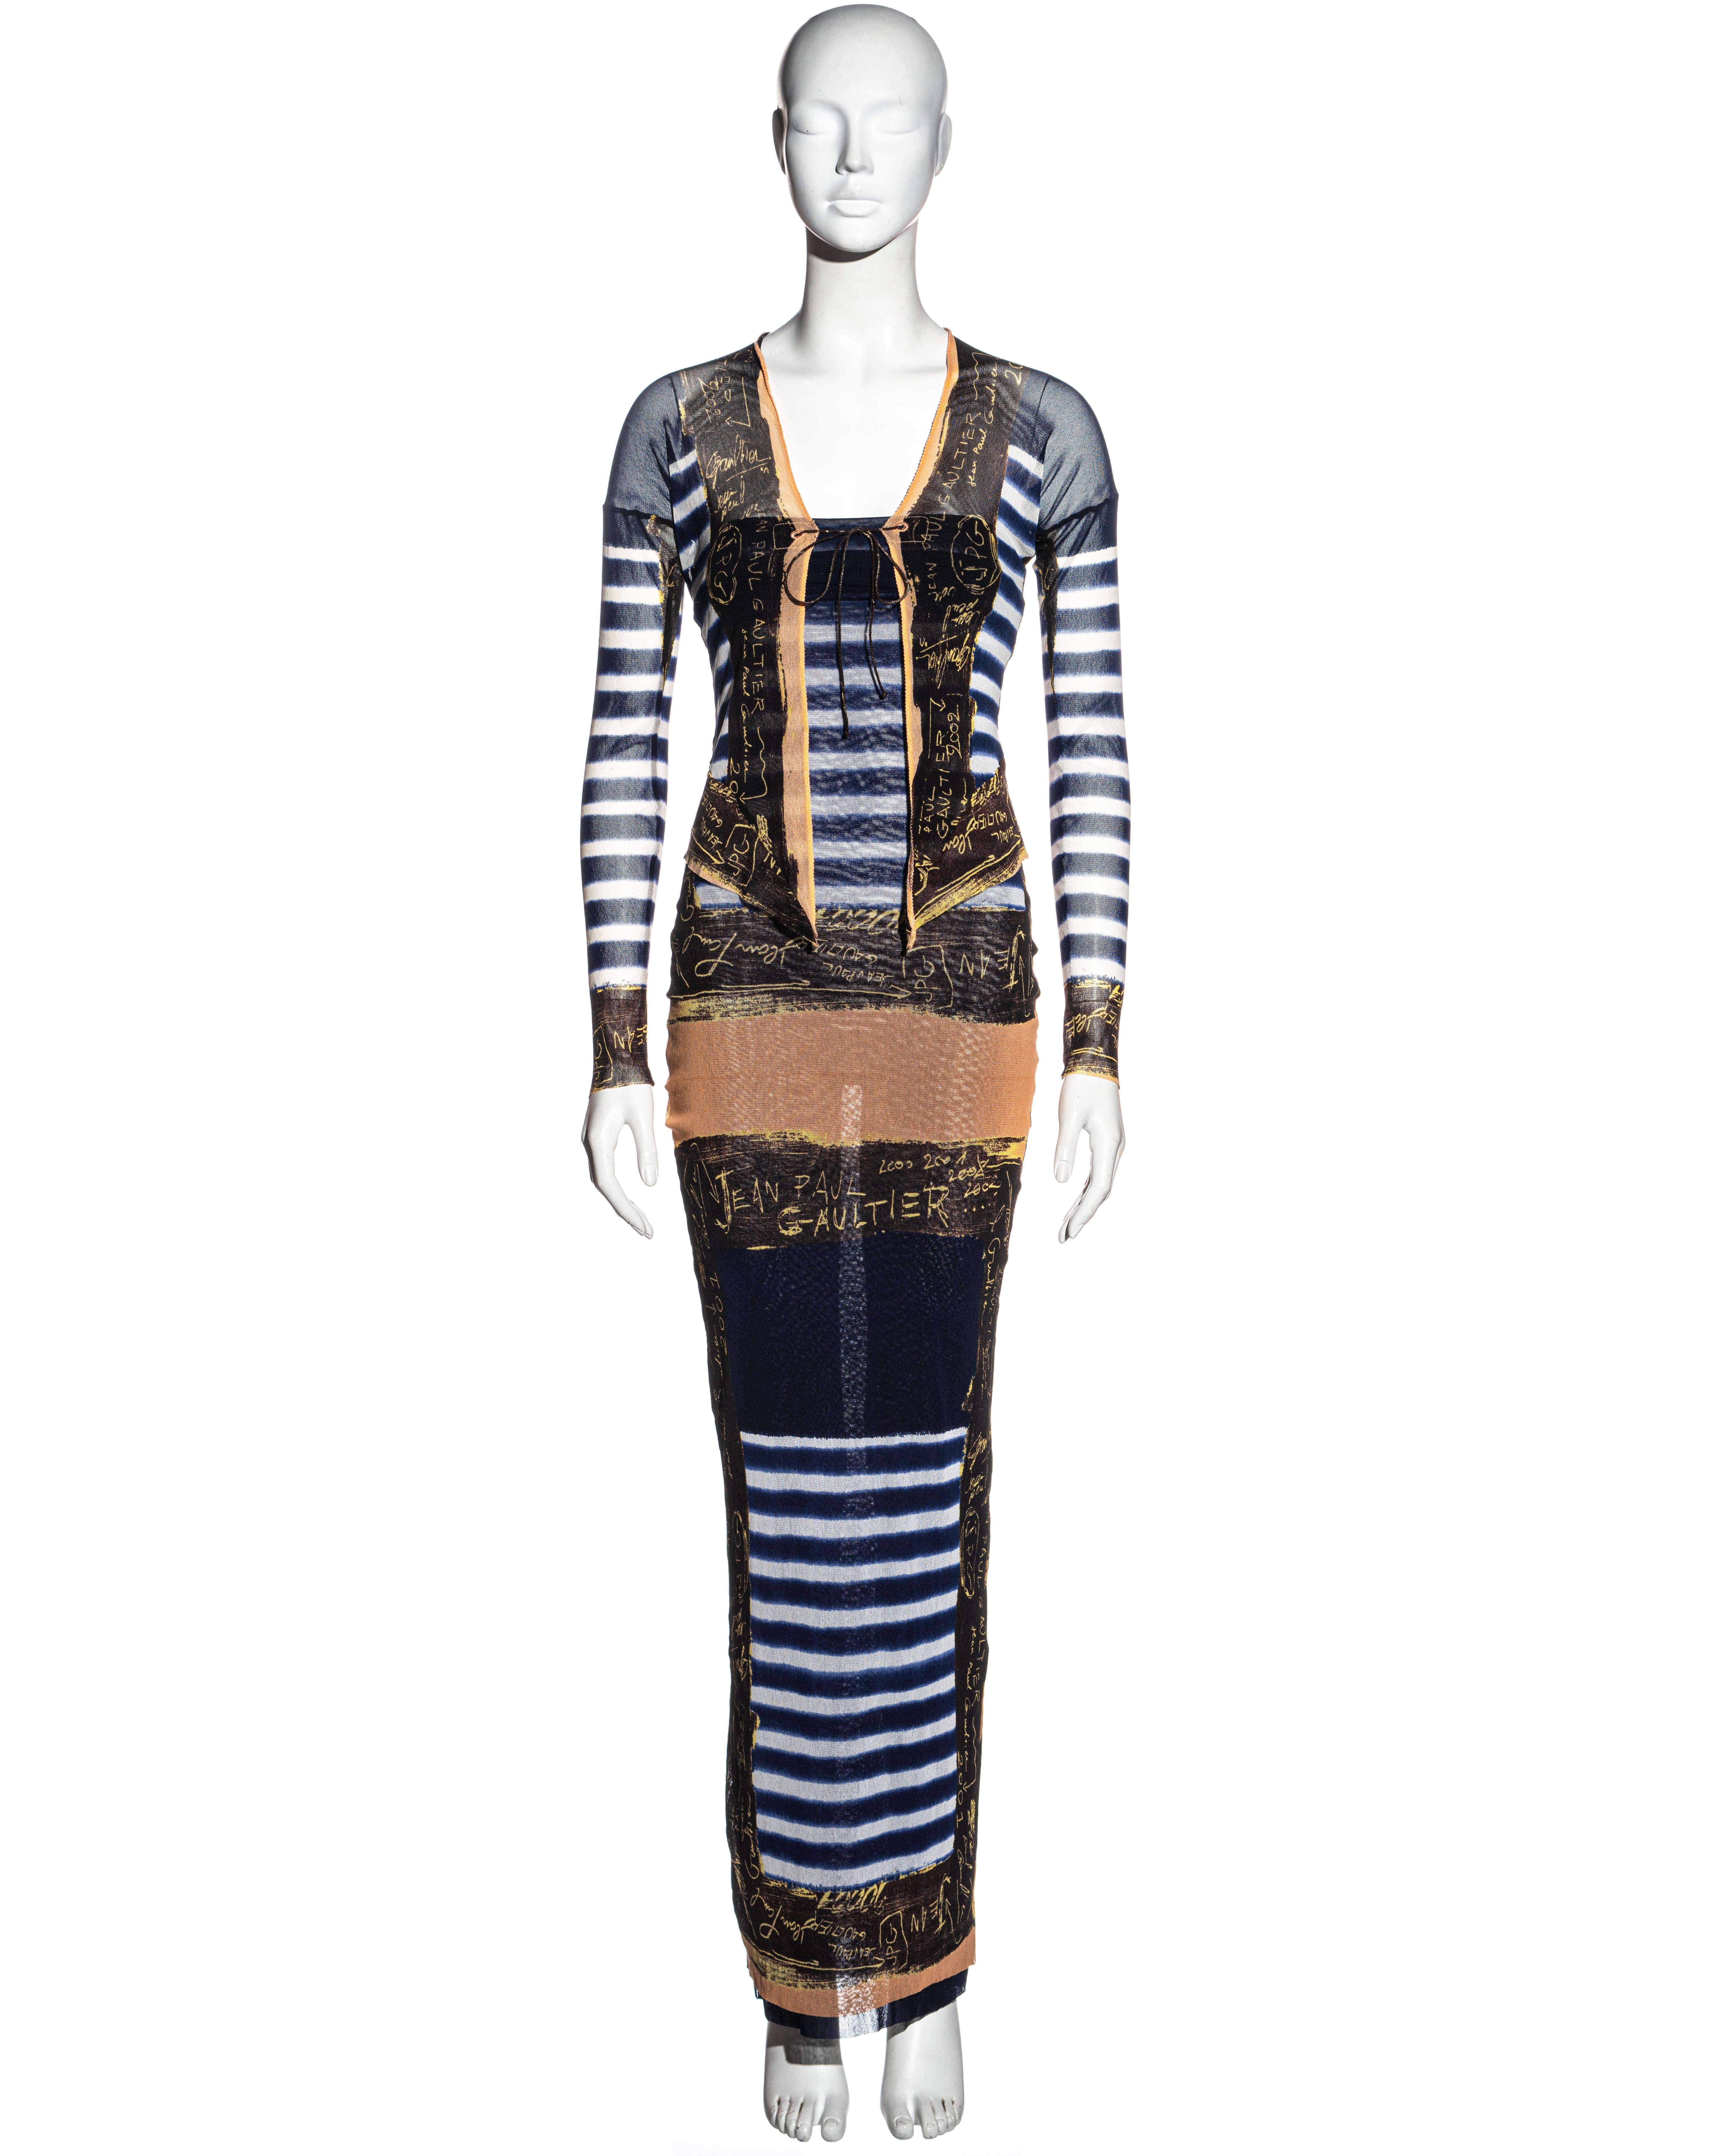 ▪ Jean Paul Gaultier striped nylon mesh tube dress and cardigan set
▪ Navy blue and white stripes with a graffiti print border 
▪ Fitted cardigan with open front and string ties 
▪ Maxi tube dress which can also be styled as a skirt
▪ Size approx.